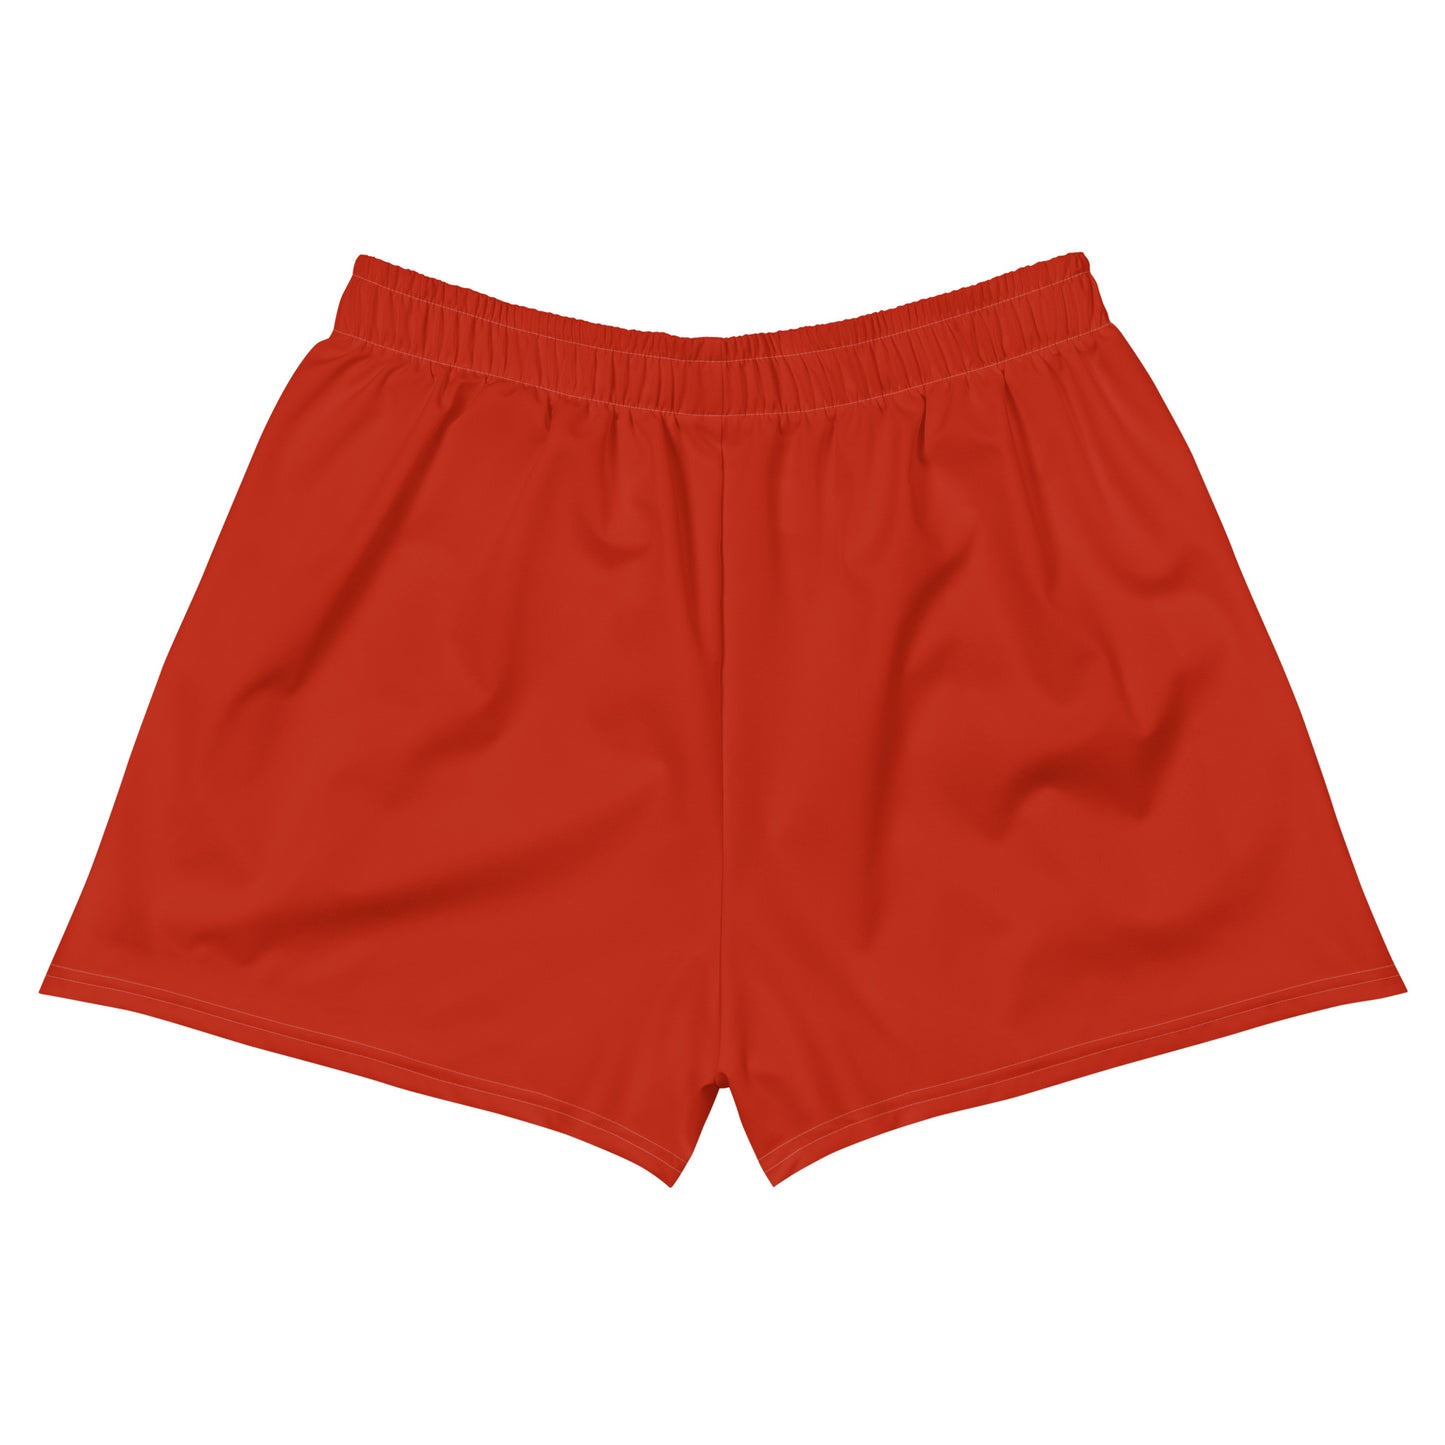 Women’s Athletic Shorts: Solids Collection in Piper